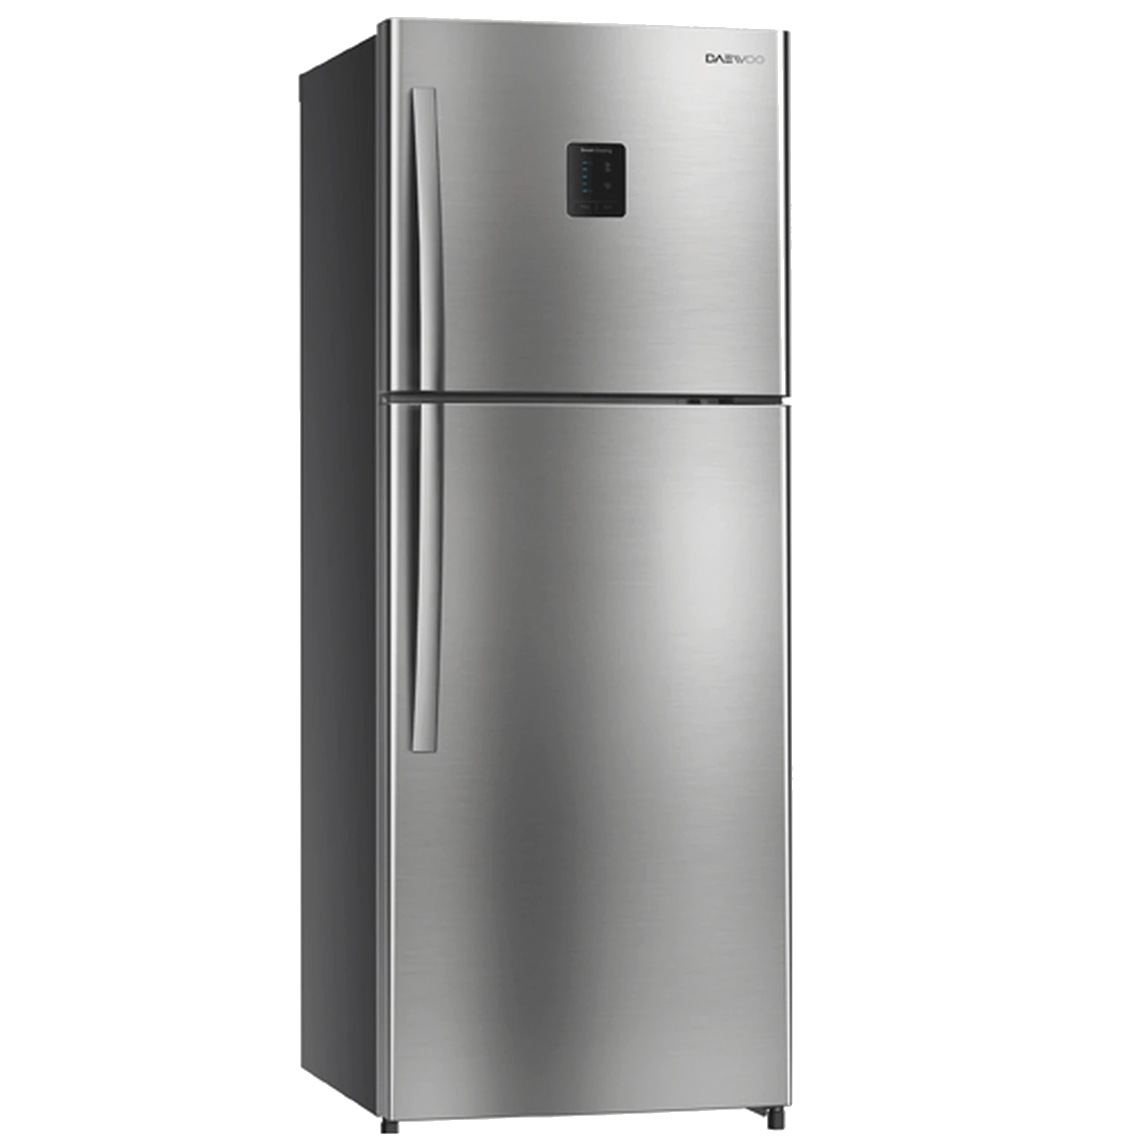 14+ Daewoo refrigerator not cooling ideas in 2021 